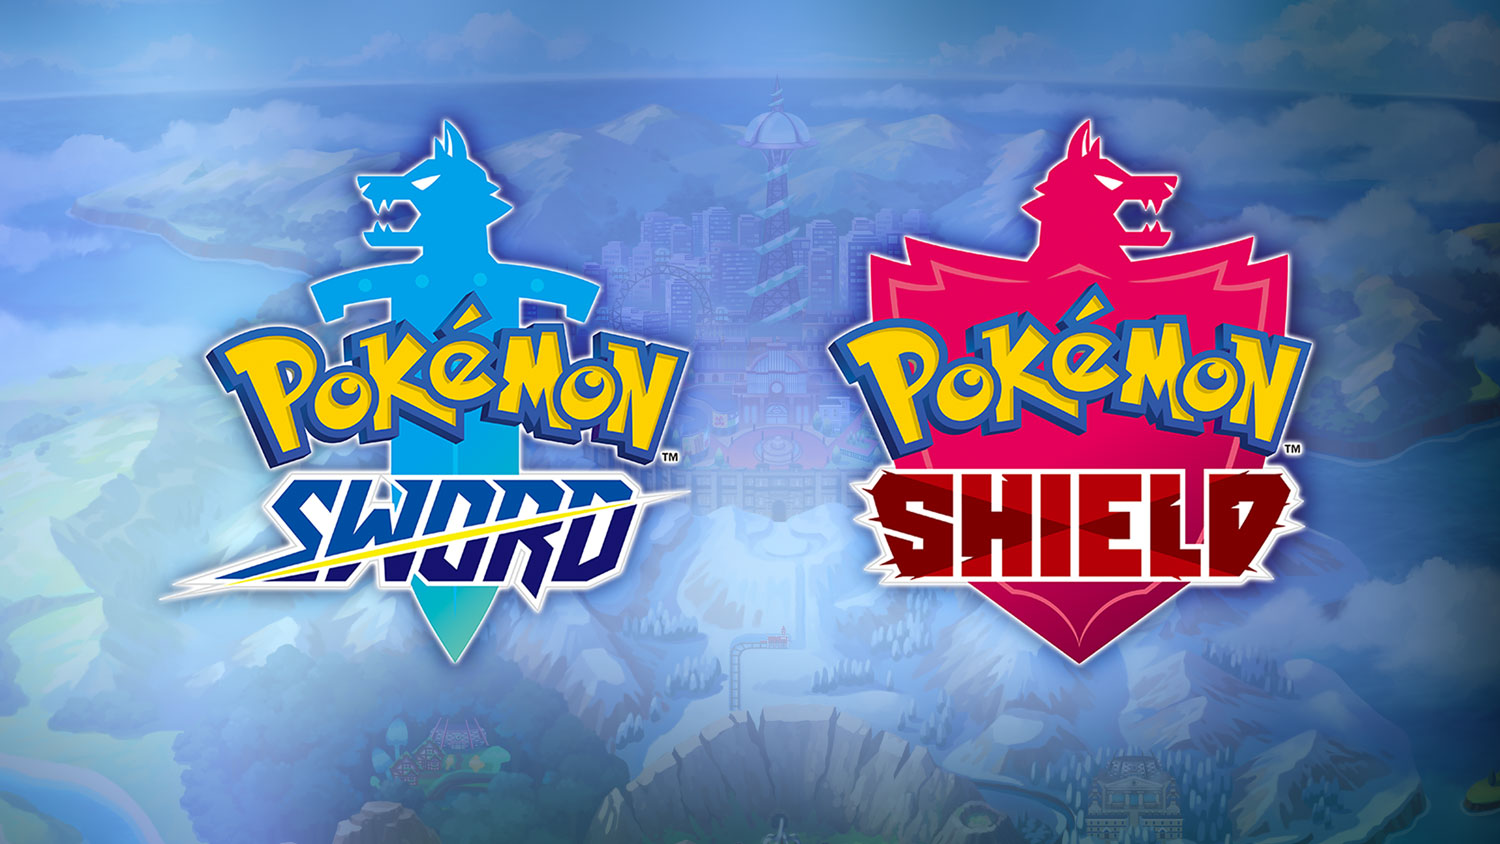 Pokémon 2019 release! Sword & Shield – questions and answers | Eneba